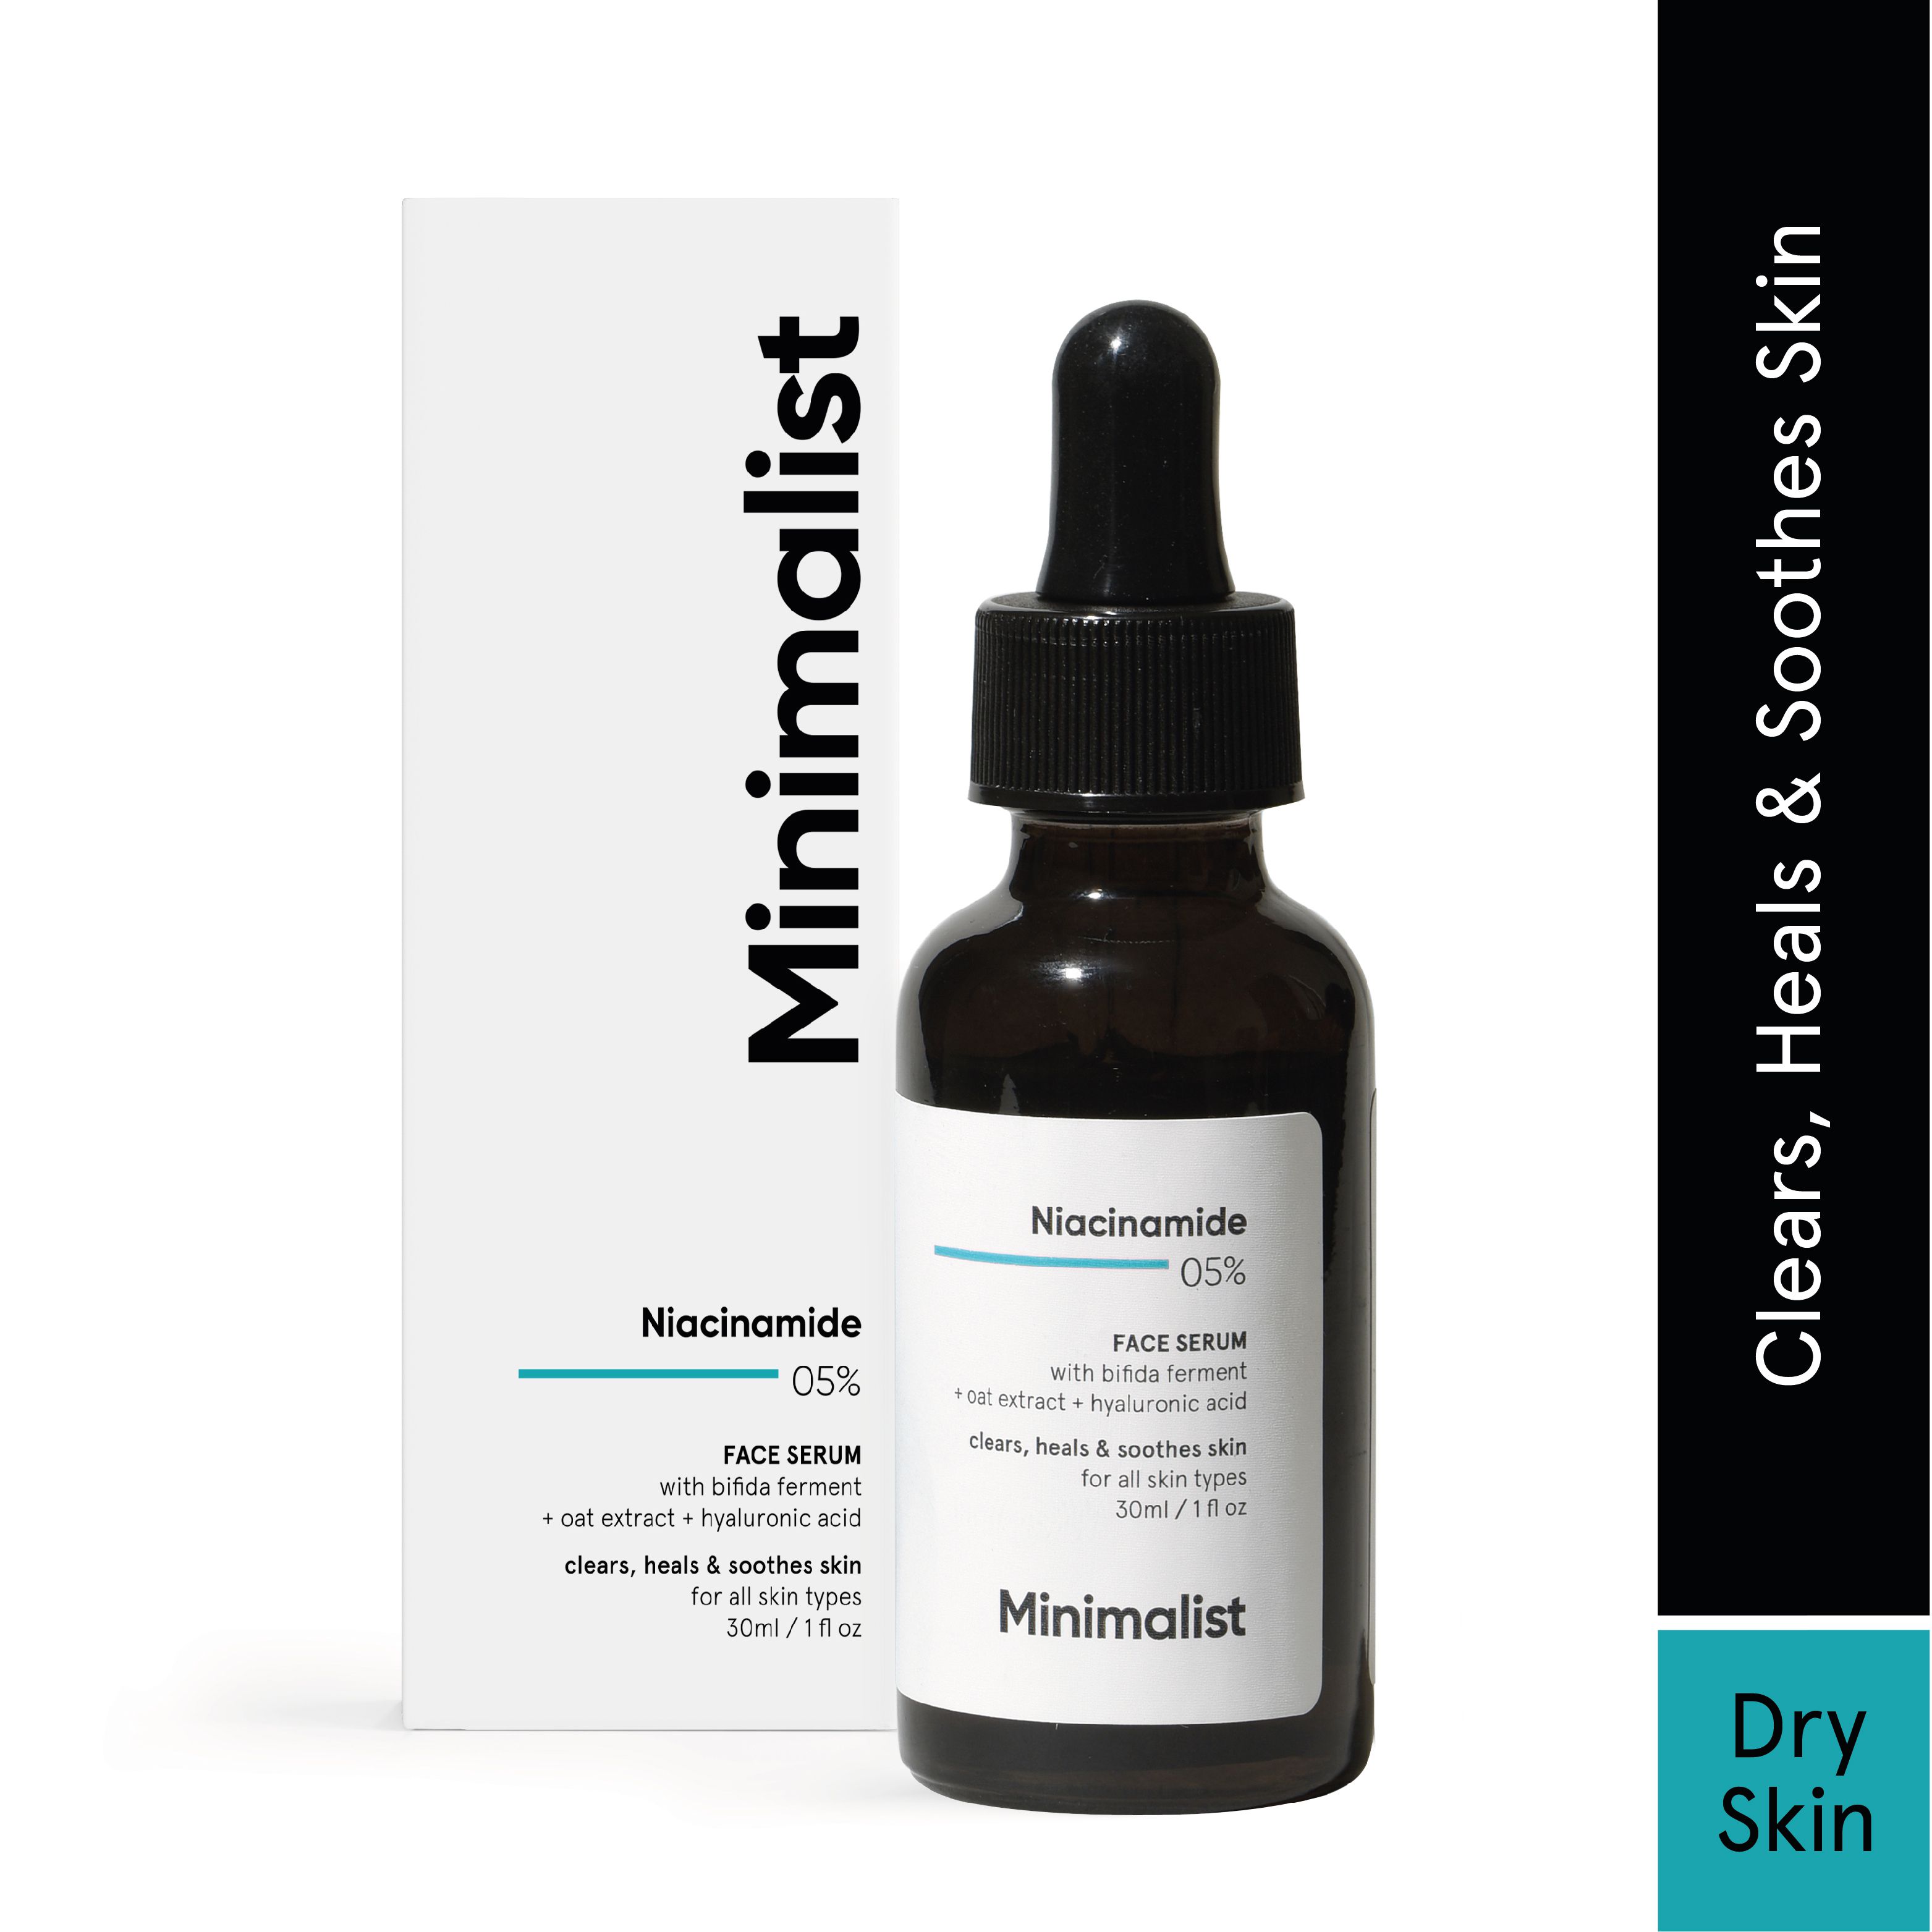     			Minimalist 5% Niacinamide Face Serum for Glowing & Clear Skin with 1% Hyaluronic acid, 30ml